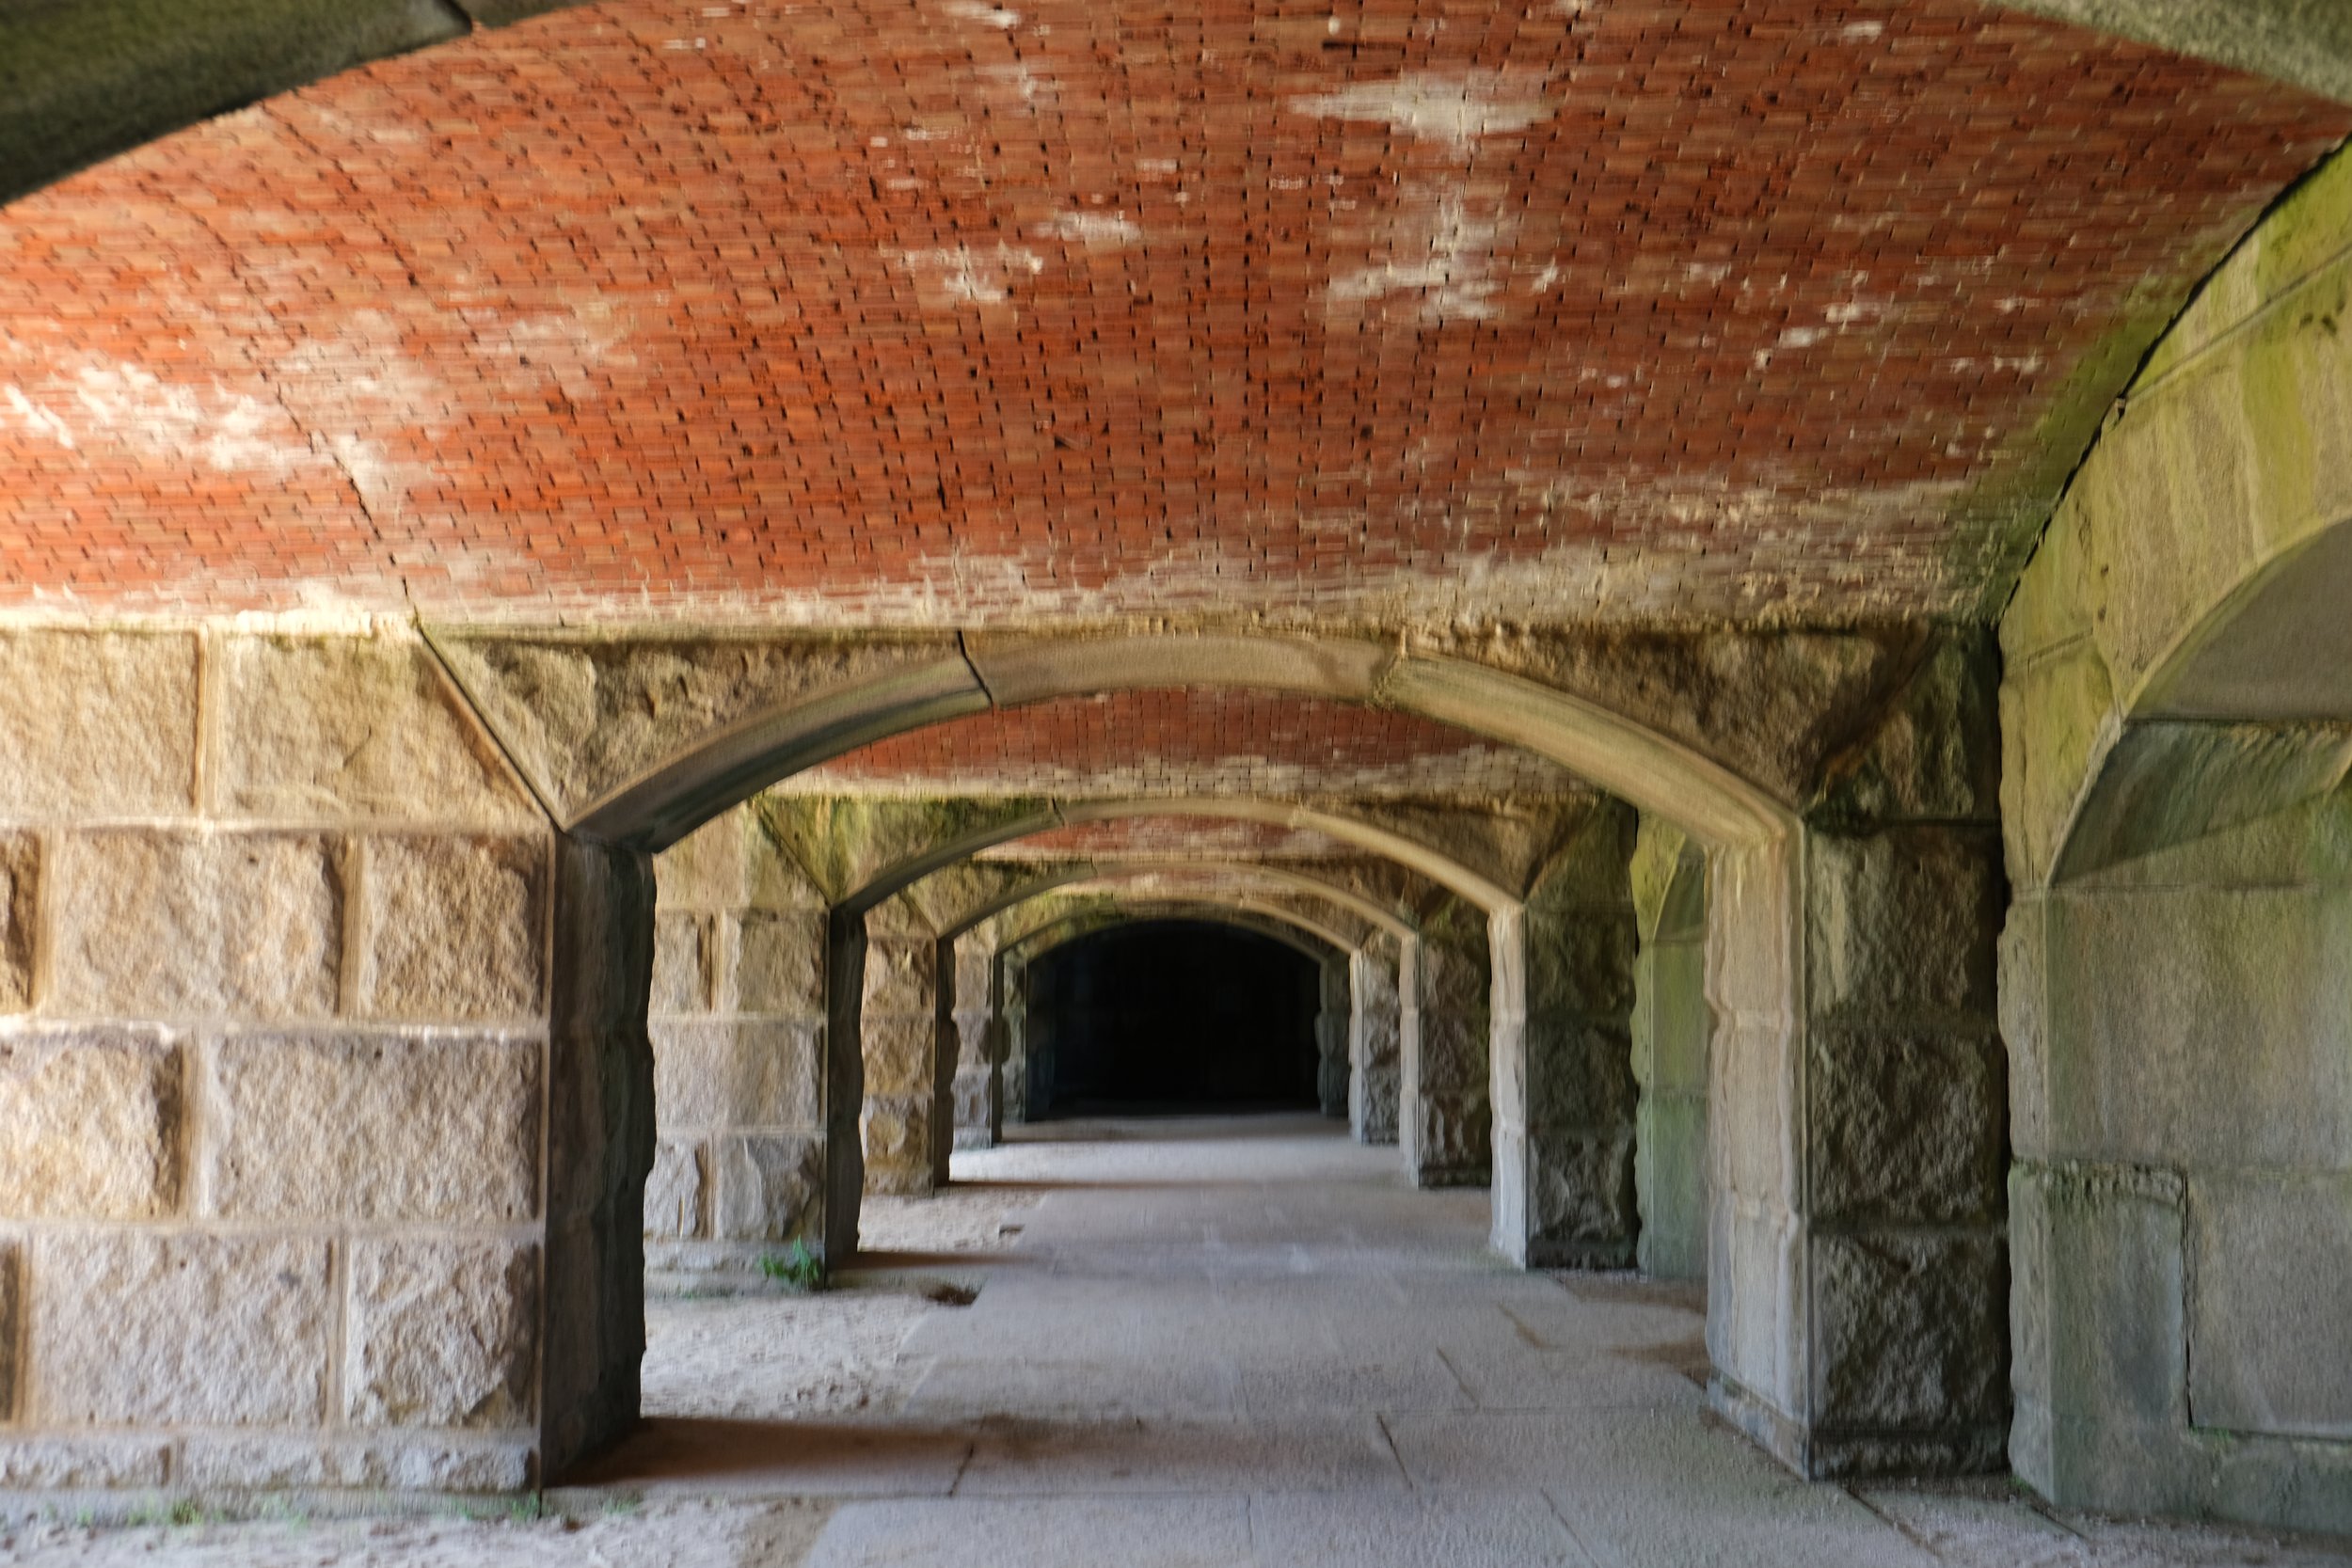   Under the fort’s granite and brick arches.  